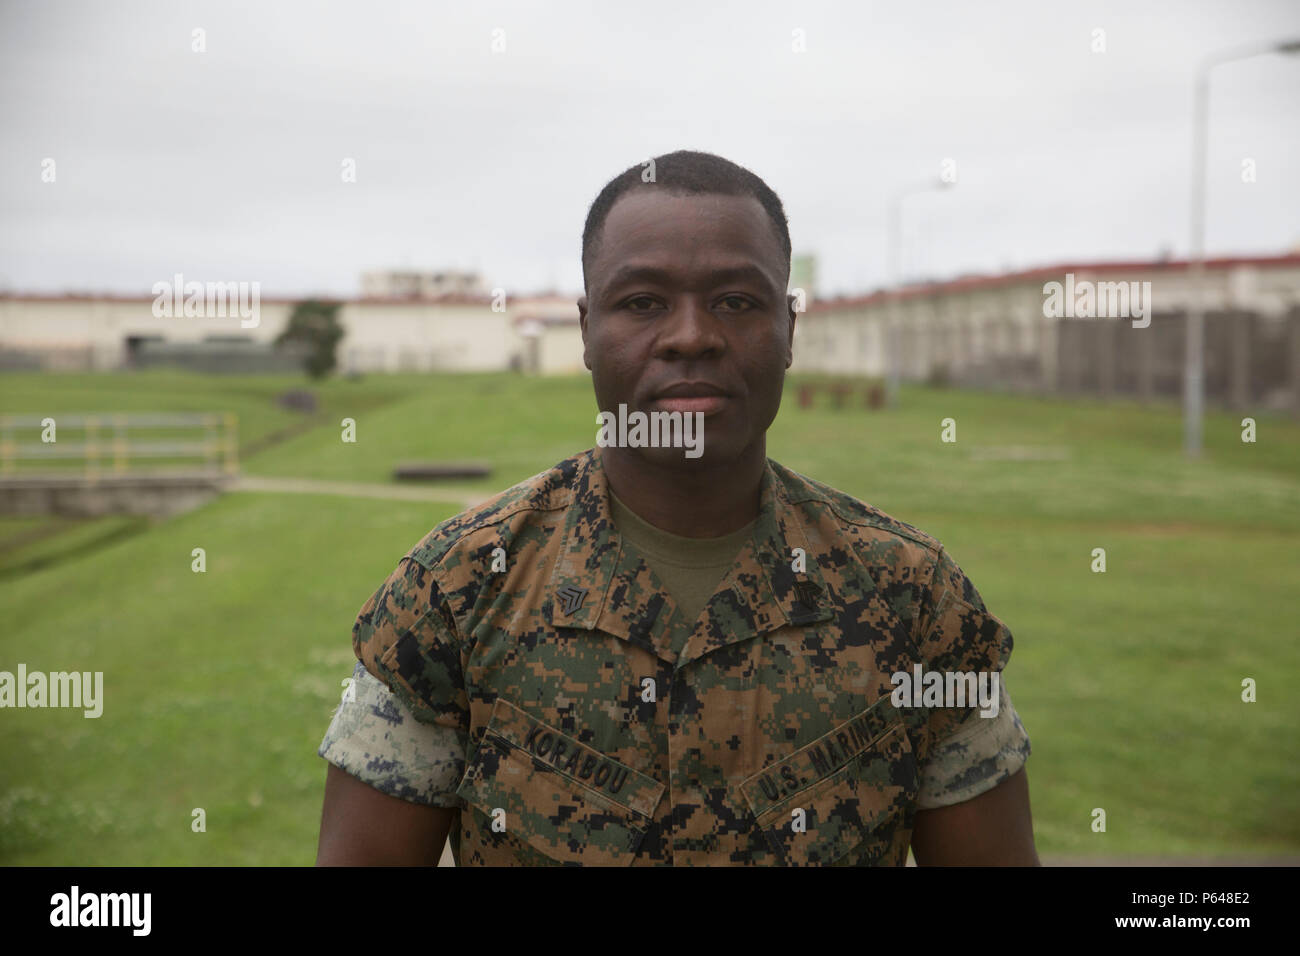 Sgt. Doudoubite Korabou poses for a picture on April 11, 2016. Korabou is part of 7th Communication Battalion and is the chief instructor at III MHG corporal’s course where teaches classes, organizes administration work and provides knowledge and leadership to his subordinates.     (U.S. Marine Corps photo by LCpl. Kelsey Dornfeld/ Released) Stock Photo